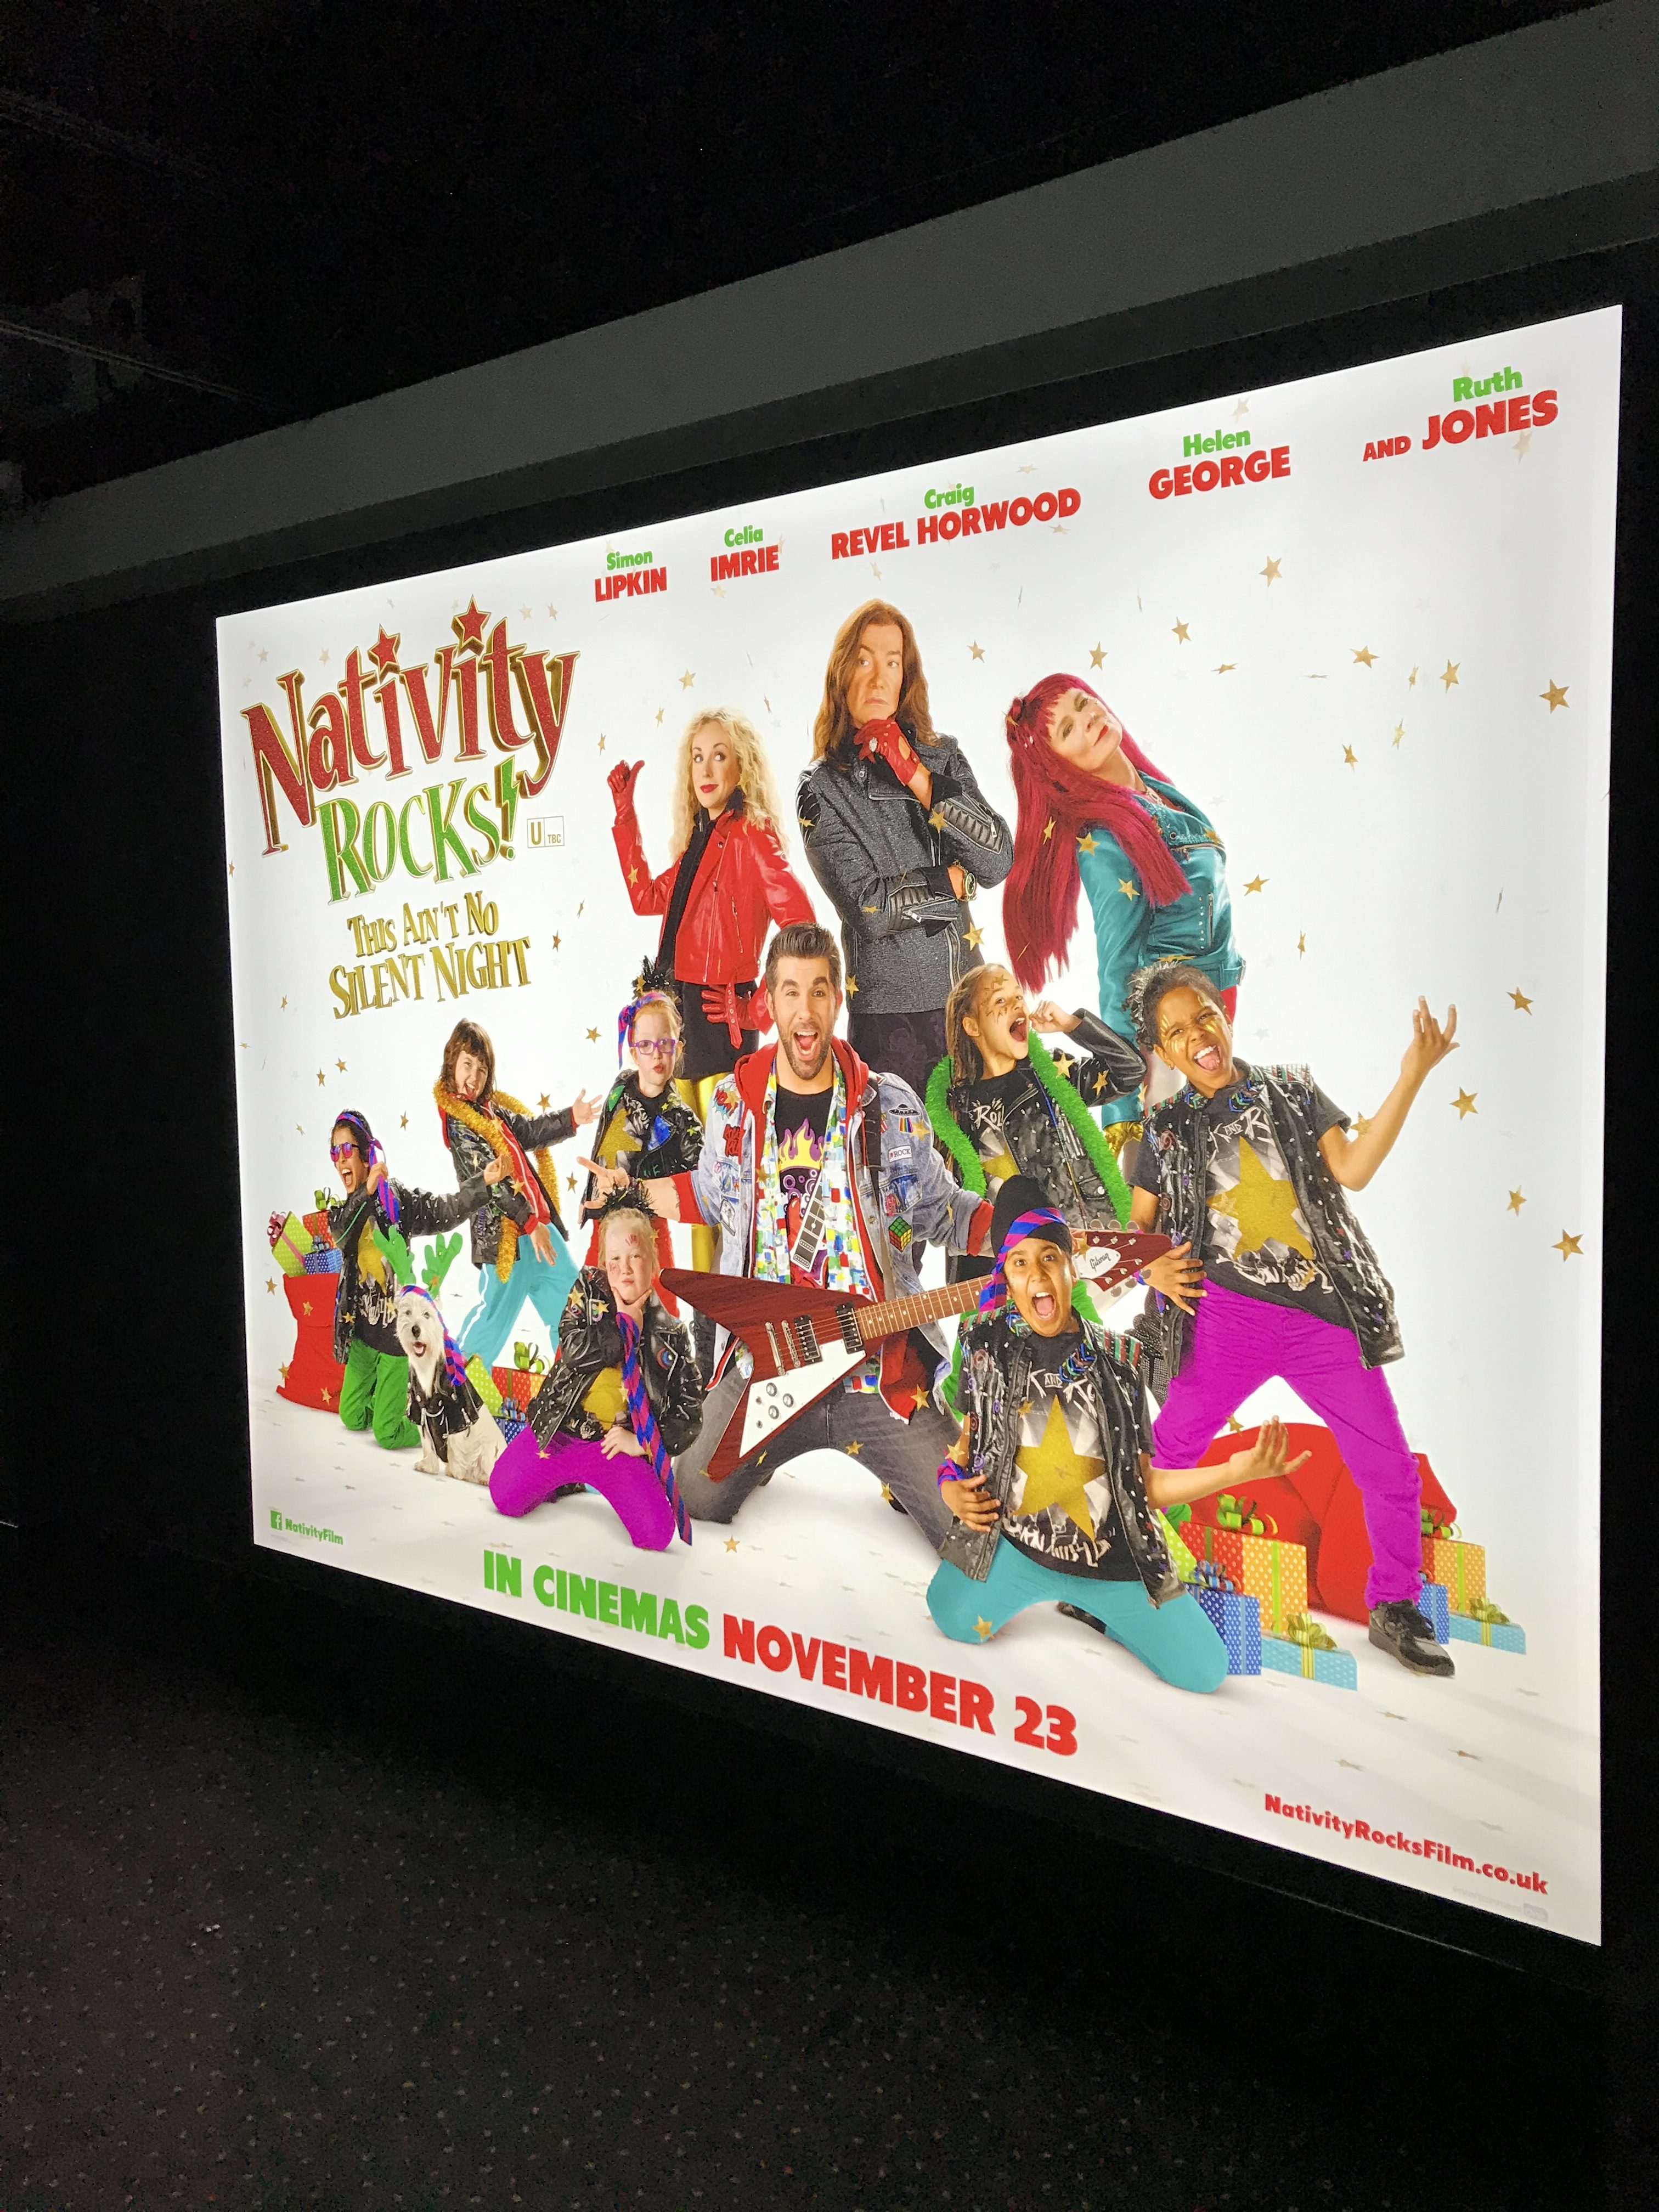 A poster for Nativity rocks! Christmas film. The main character is in the middle of the screen on his knees with an electric guitar while kids stand all around him. In the corner it says Nativity Rocks! This ain't no silent night. 